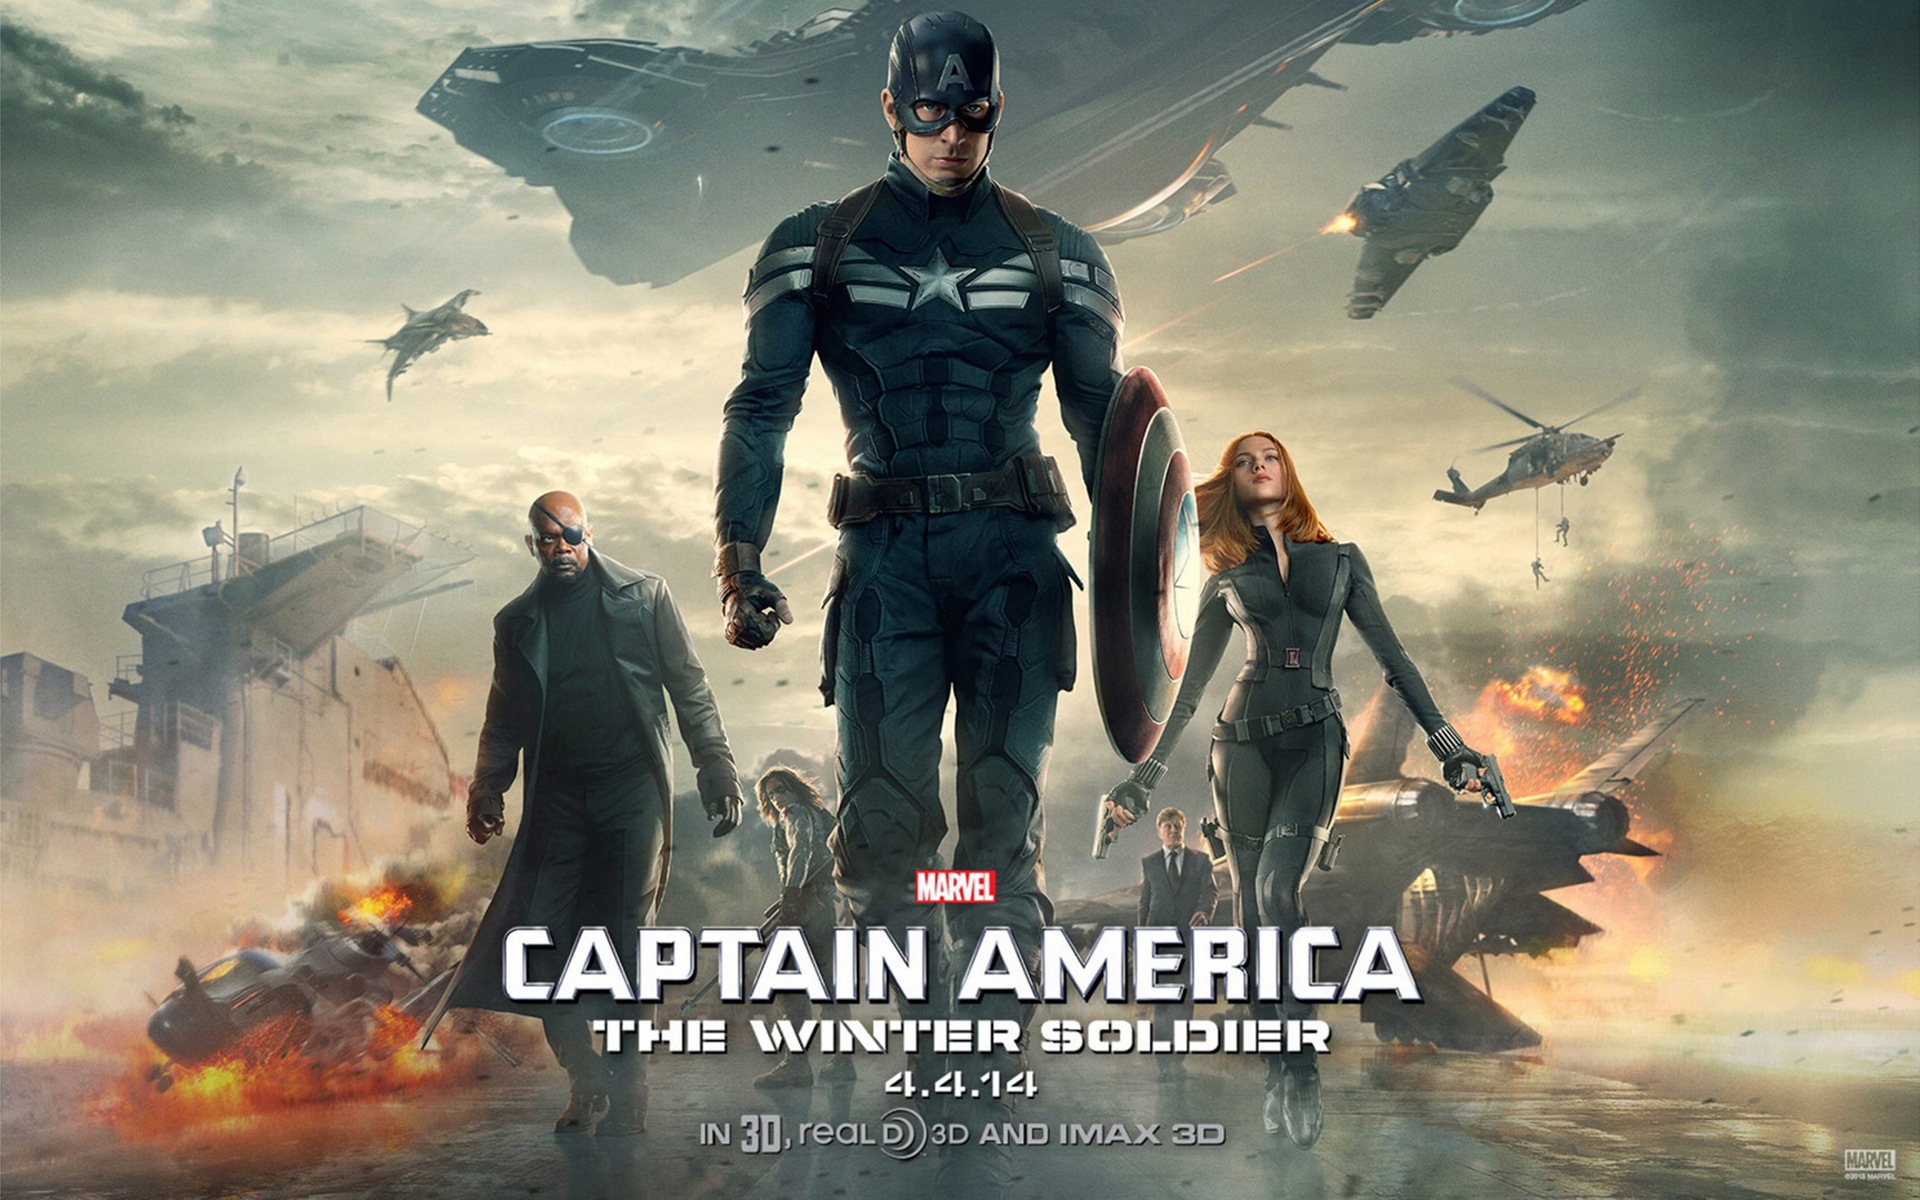 Captain America: The Winter Soldier HD wallpapers #1 - 1920x1200